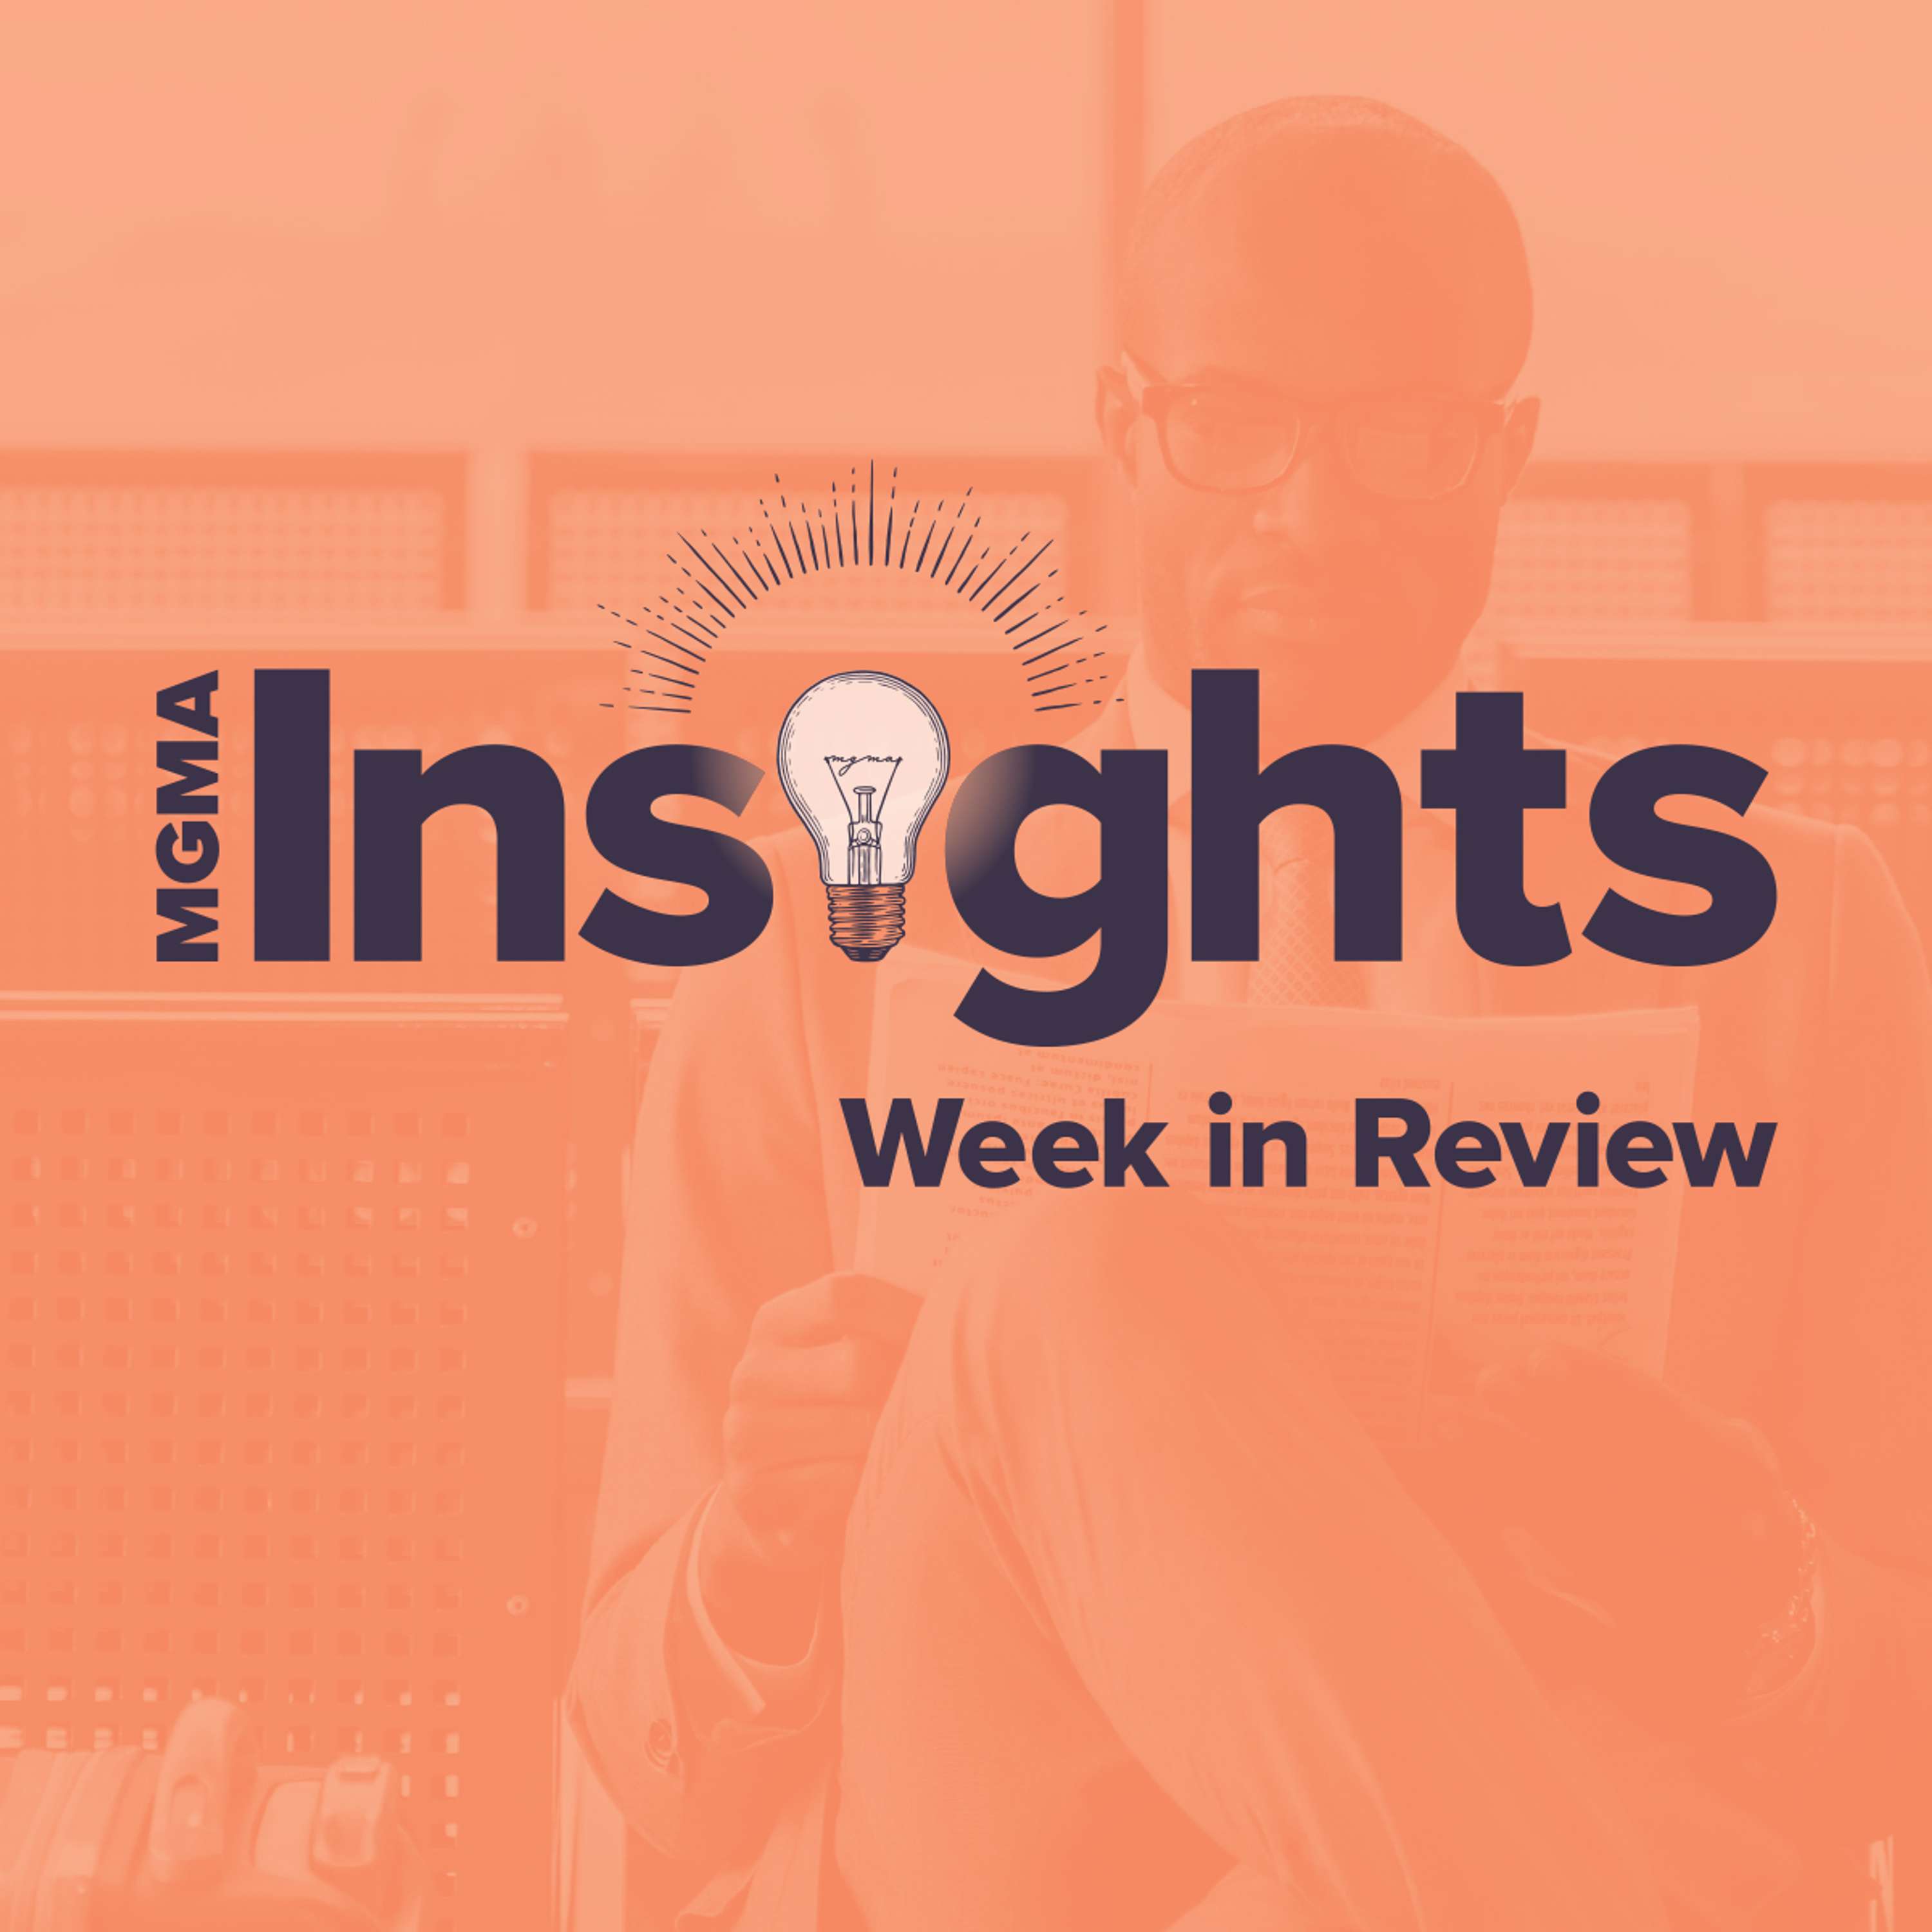 Week in Review: AI Integration in Healthcare, Medicaid Rule Changes, and Tips on Workplace Humor